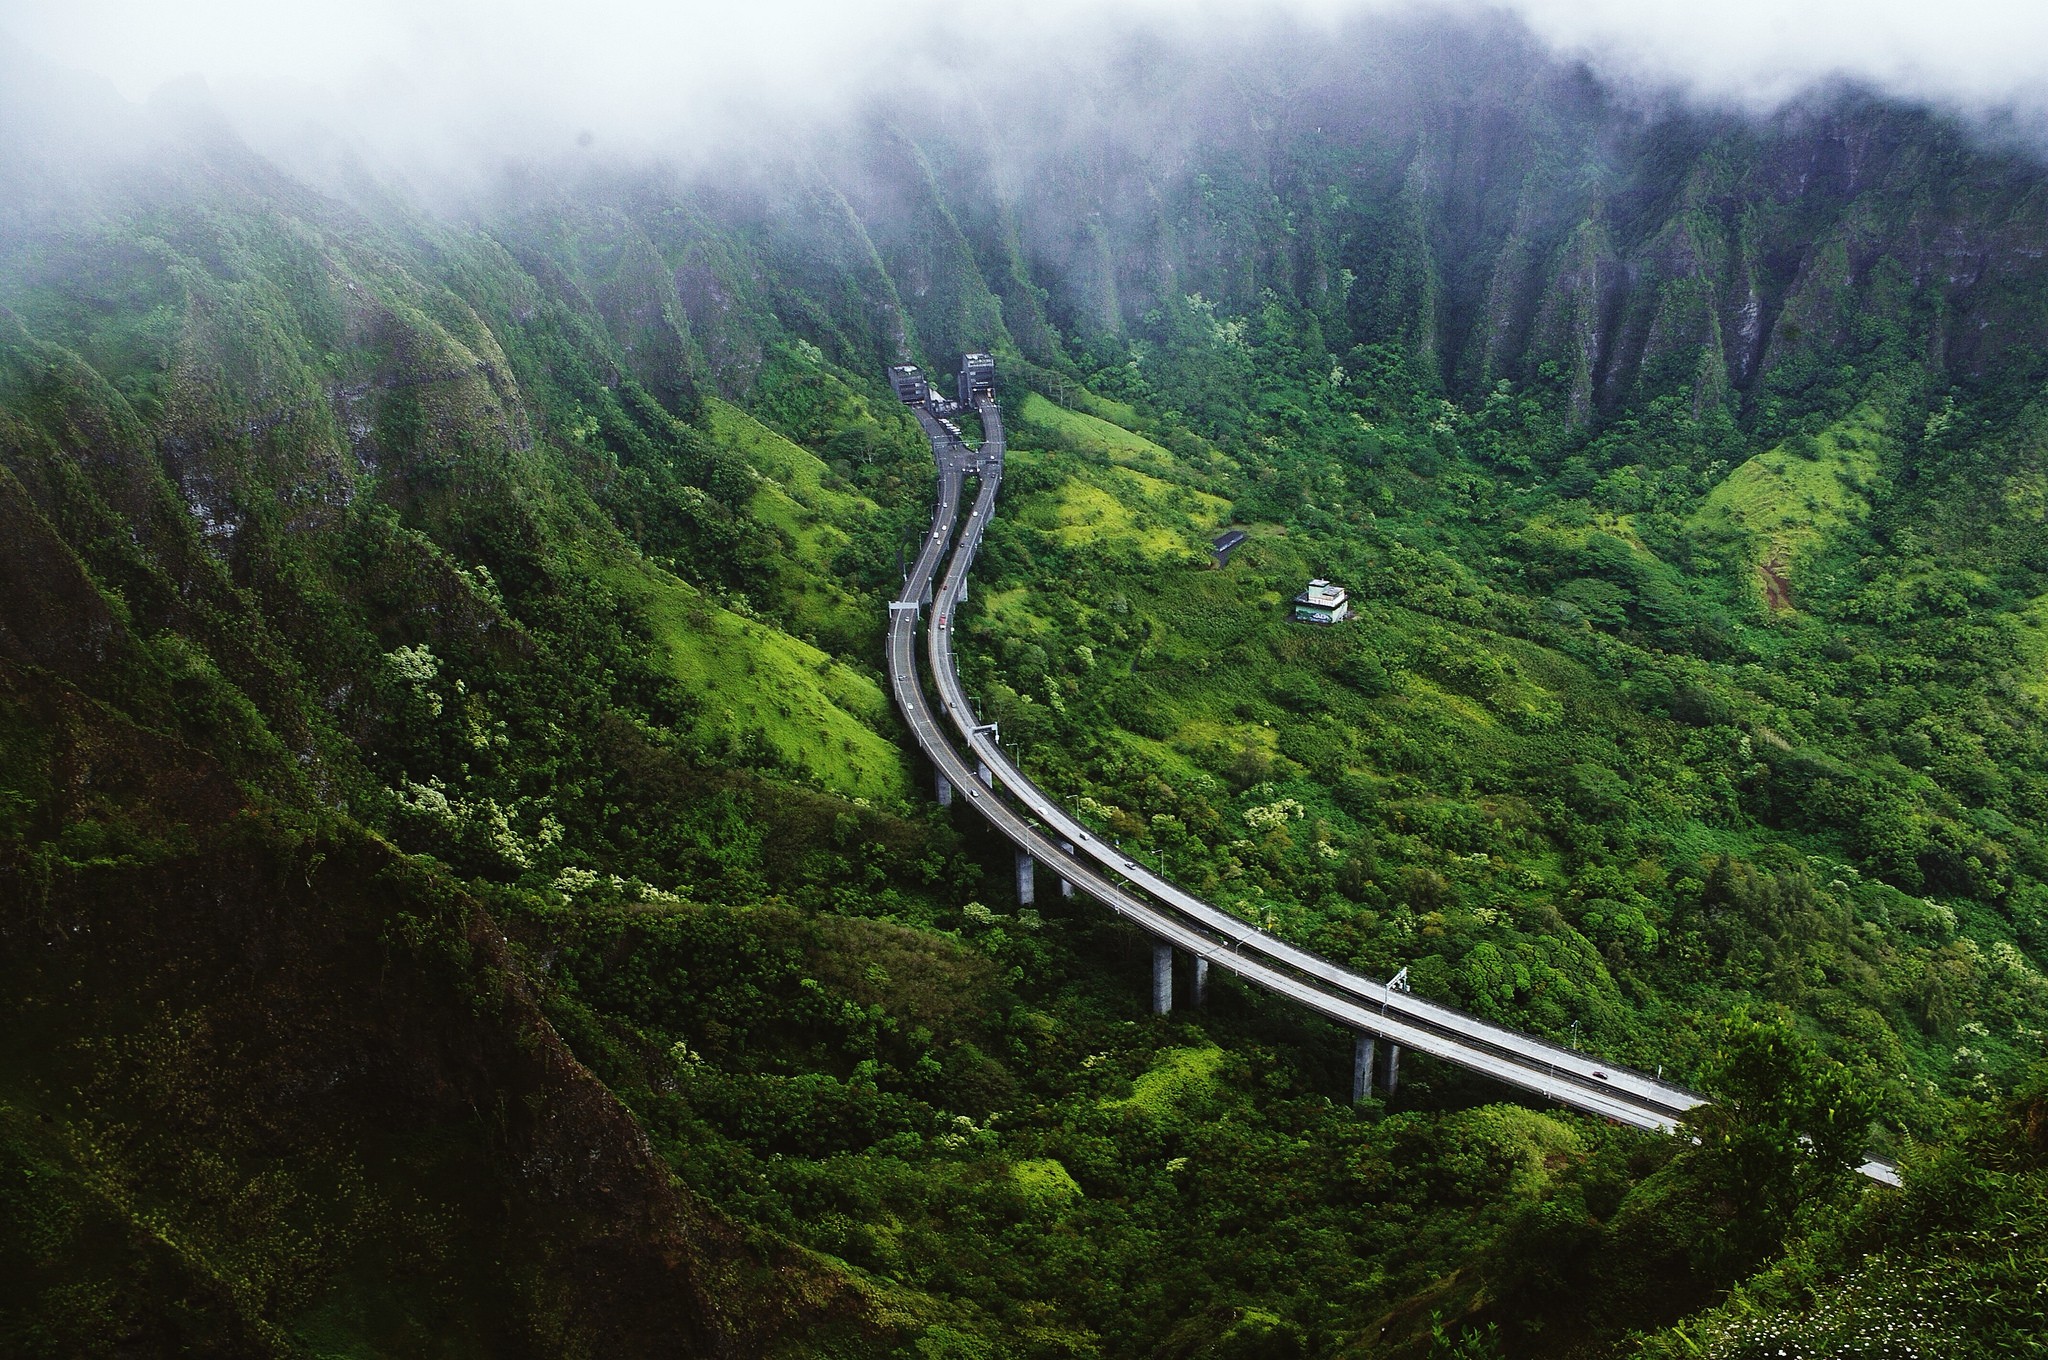 Highway in the Mountains by ERiN SiTT